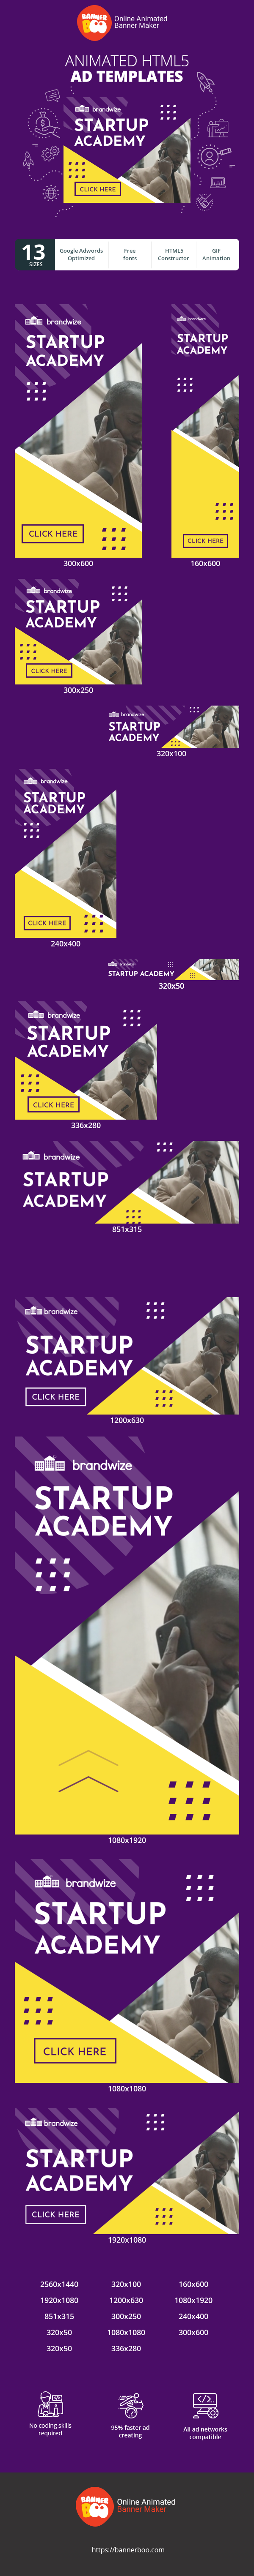 Banner ad template — Startup Academy — Business